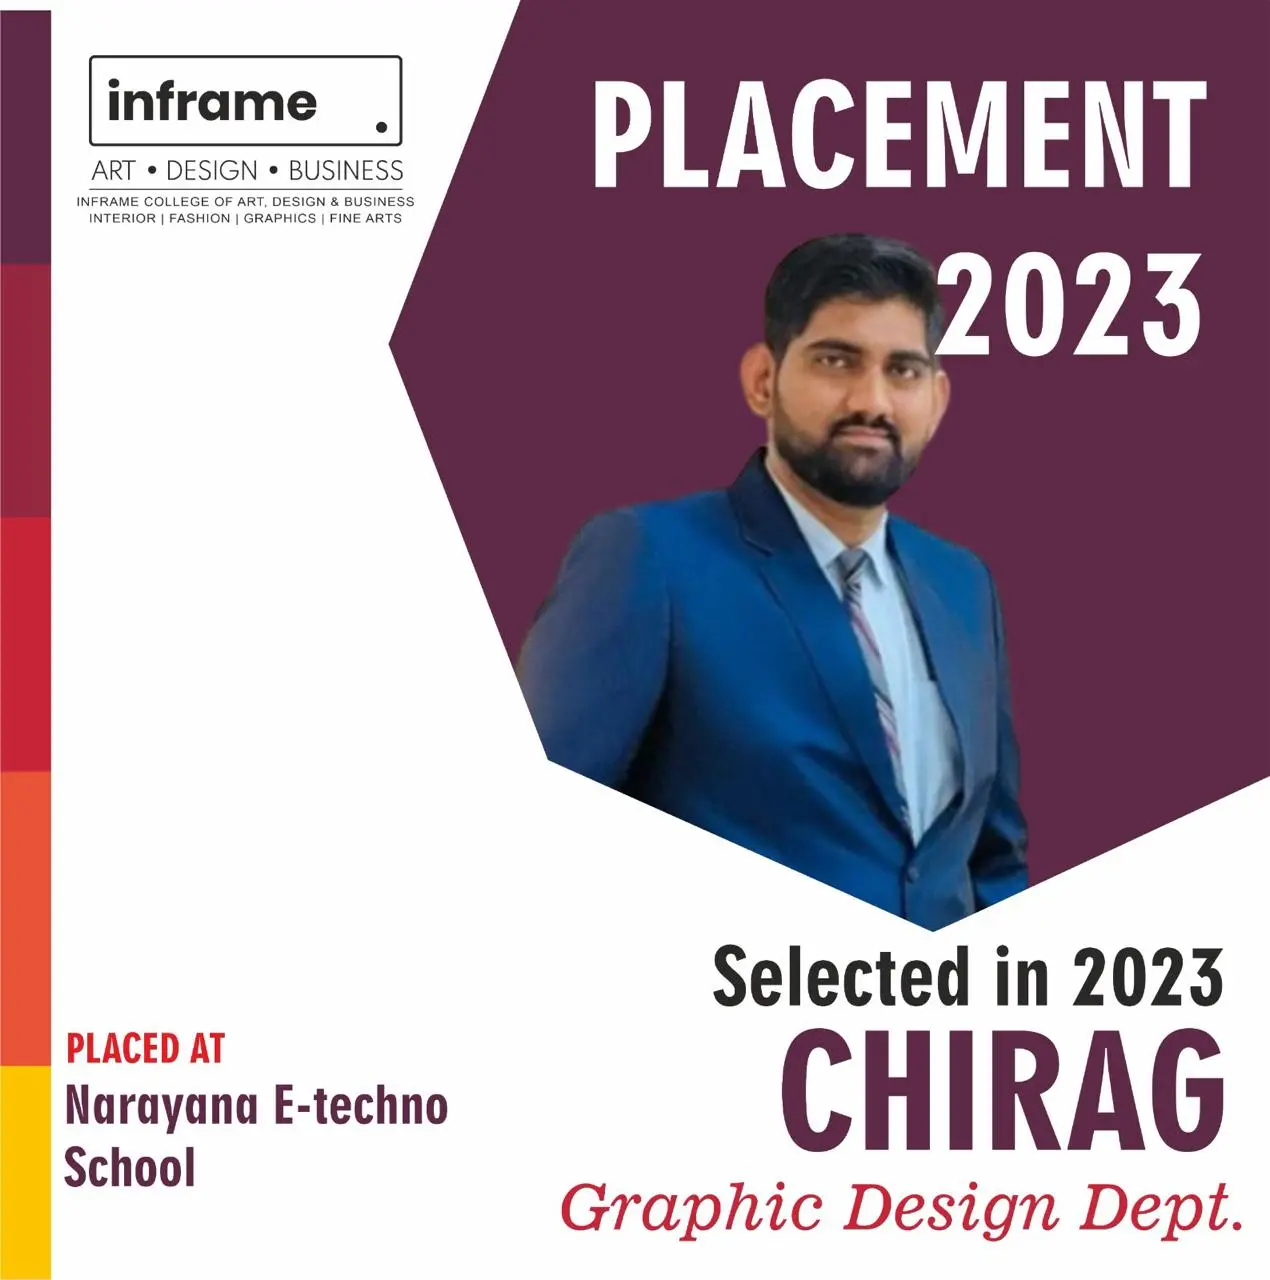 Inframe Student Placements